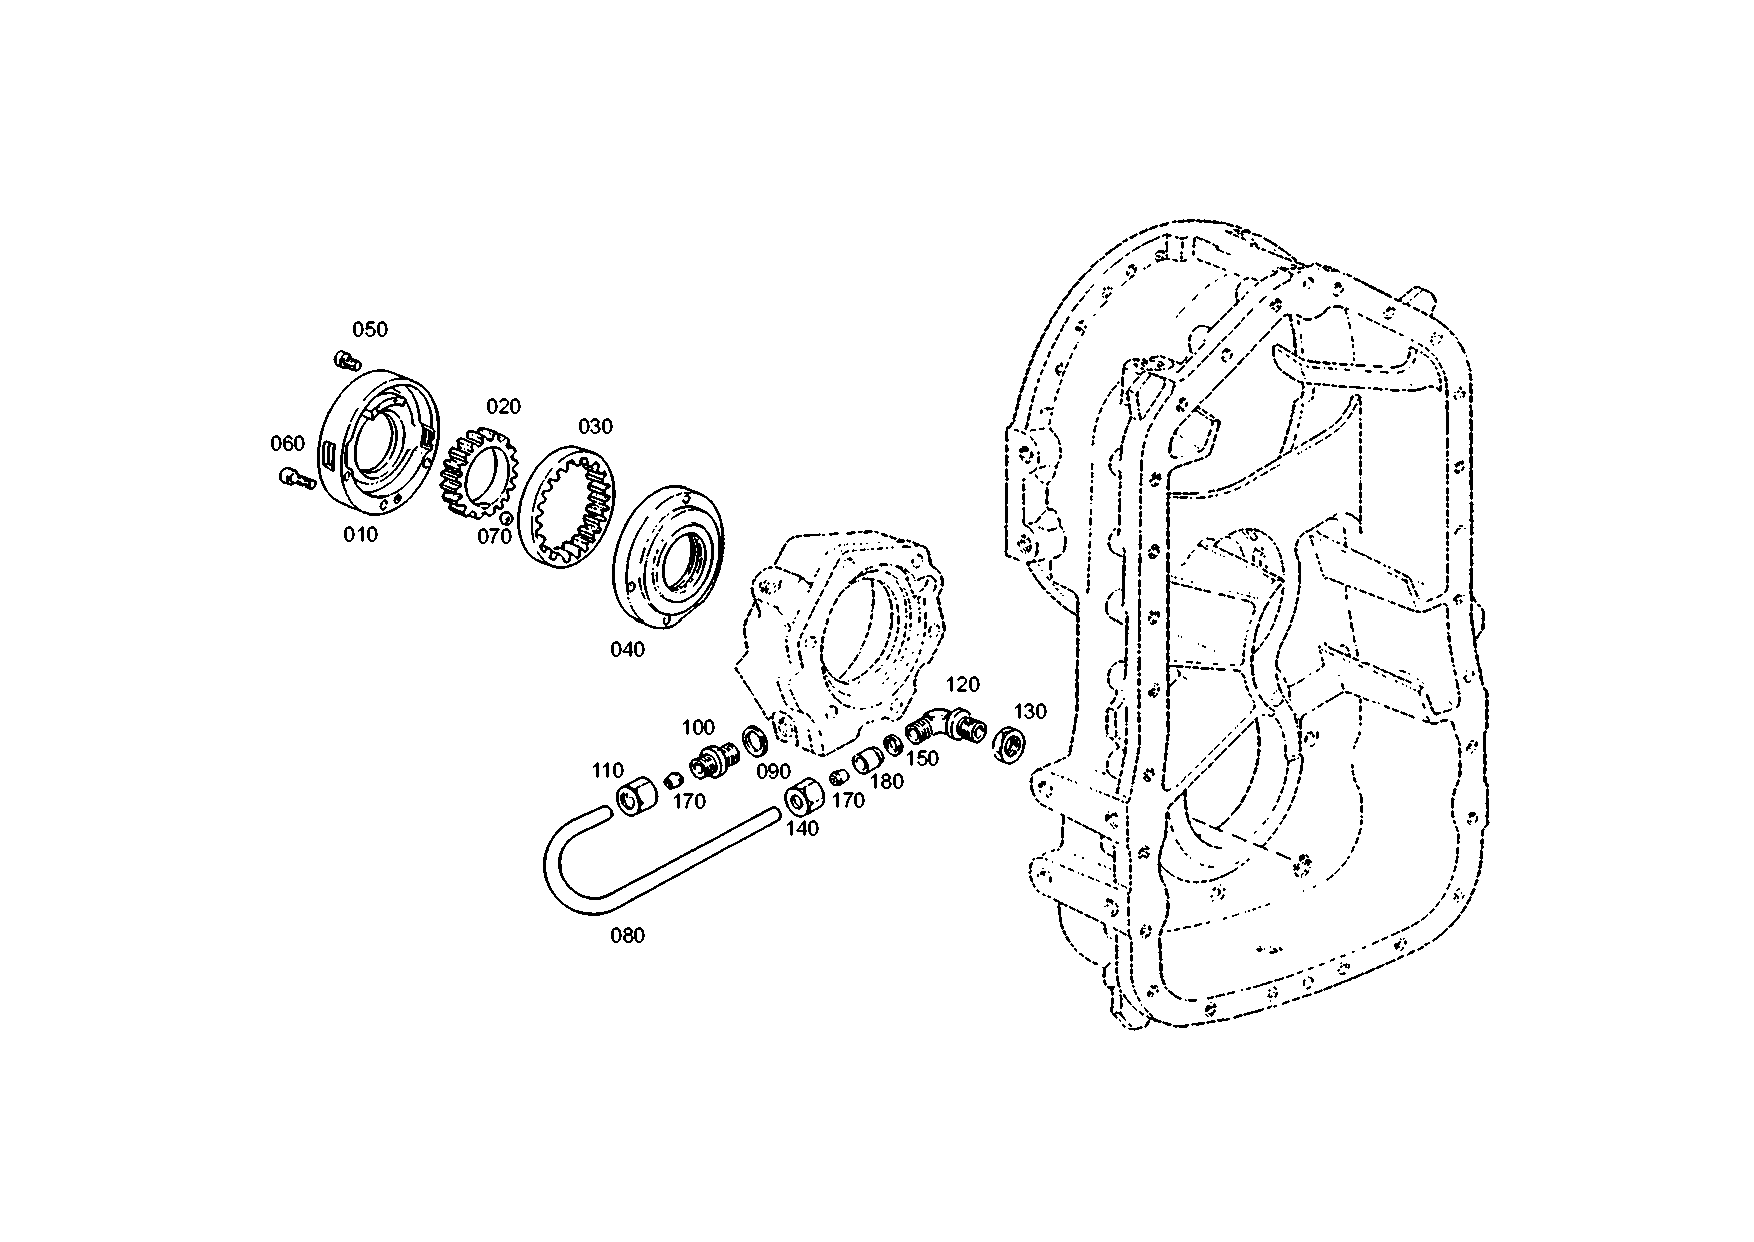 drawing for GINAF 199114250259 - PUMP HOUSING (figure 1)